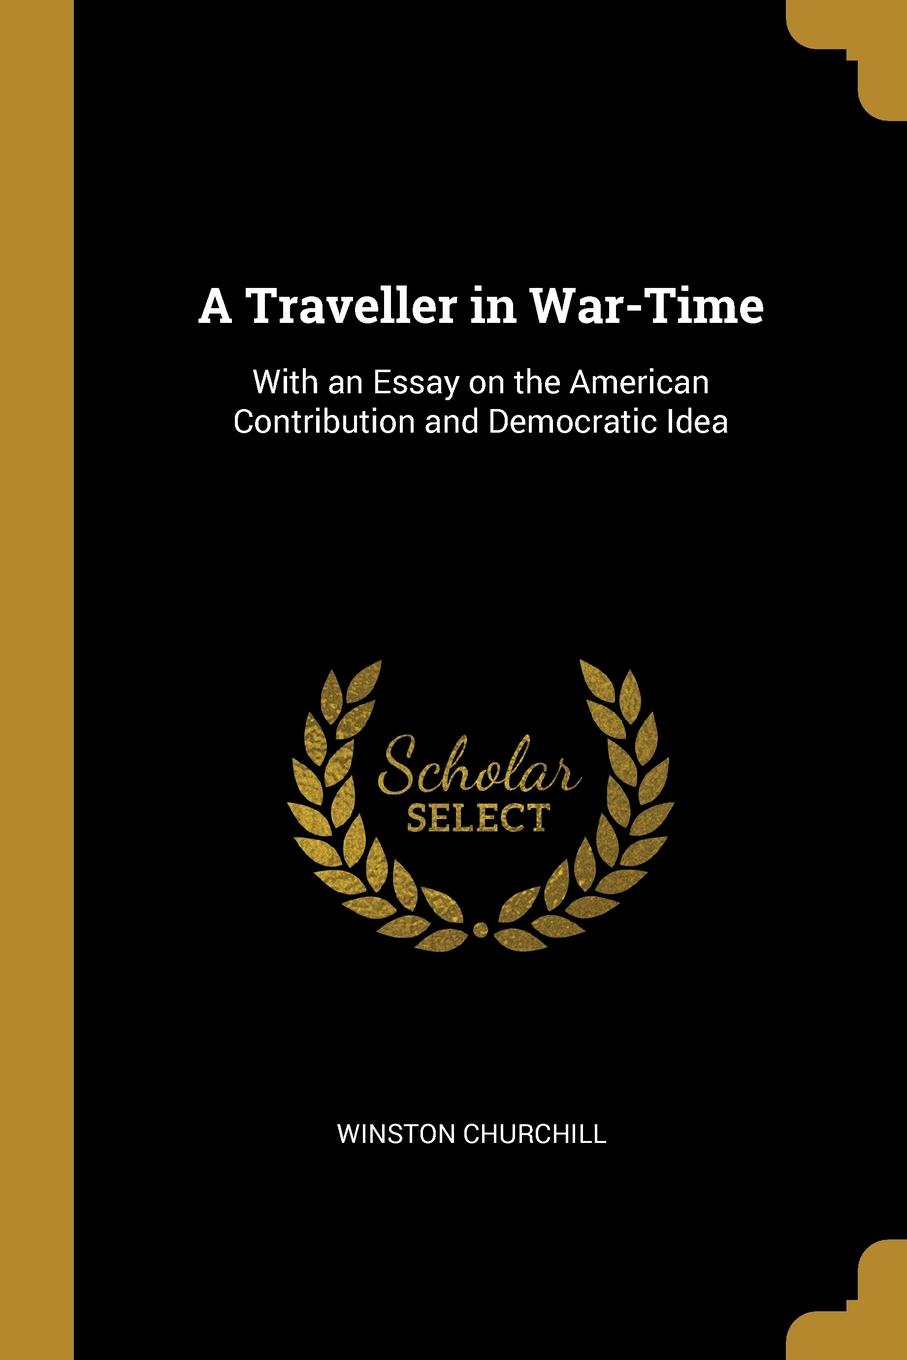 A Traveller in War-Time. With an Essay on the American Contribution and Democratic Idea